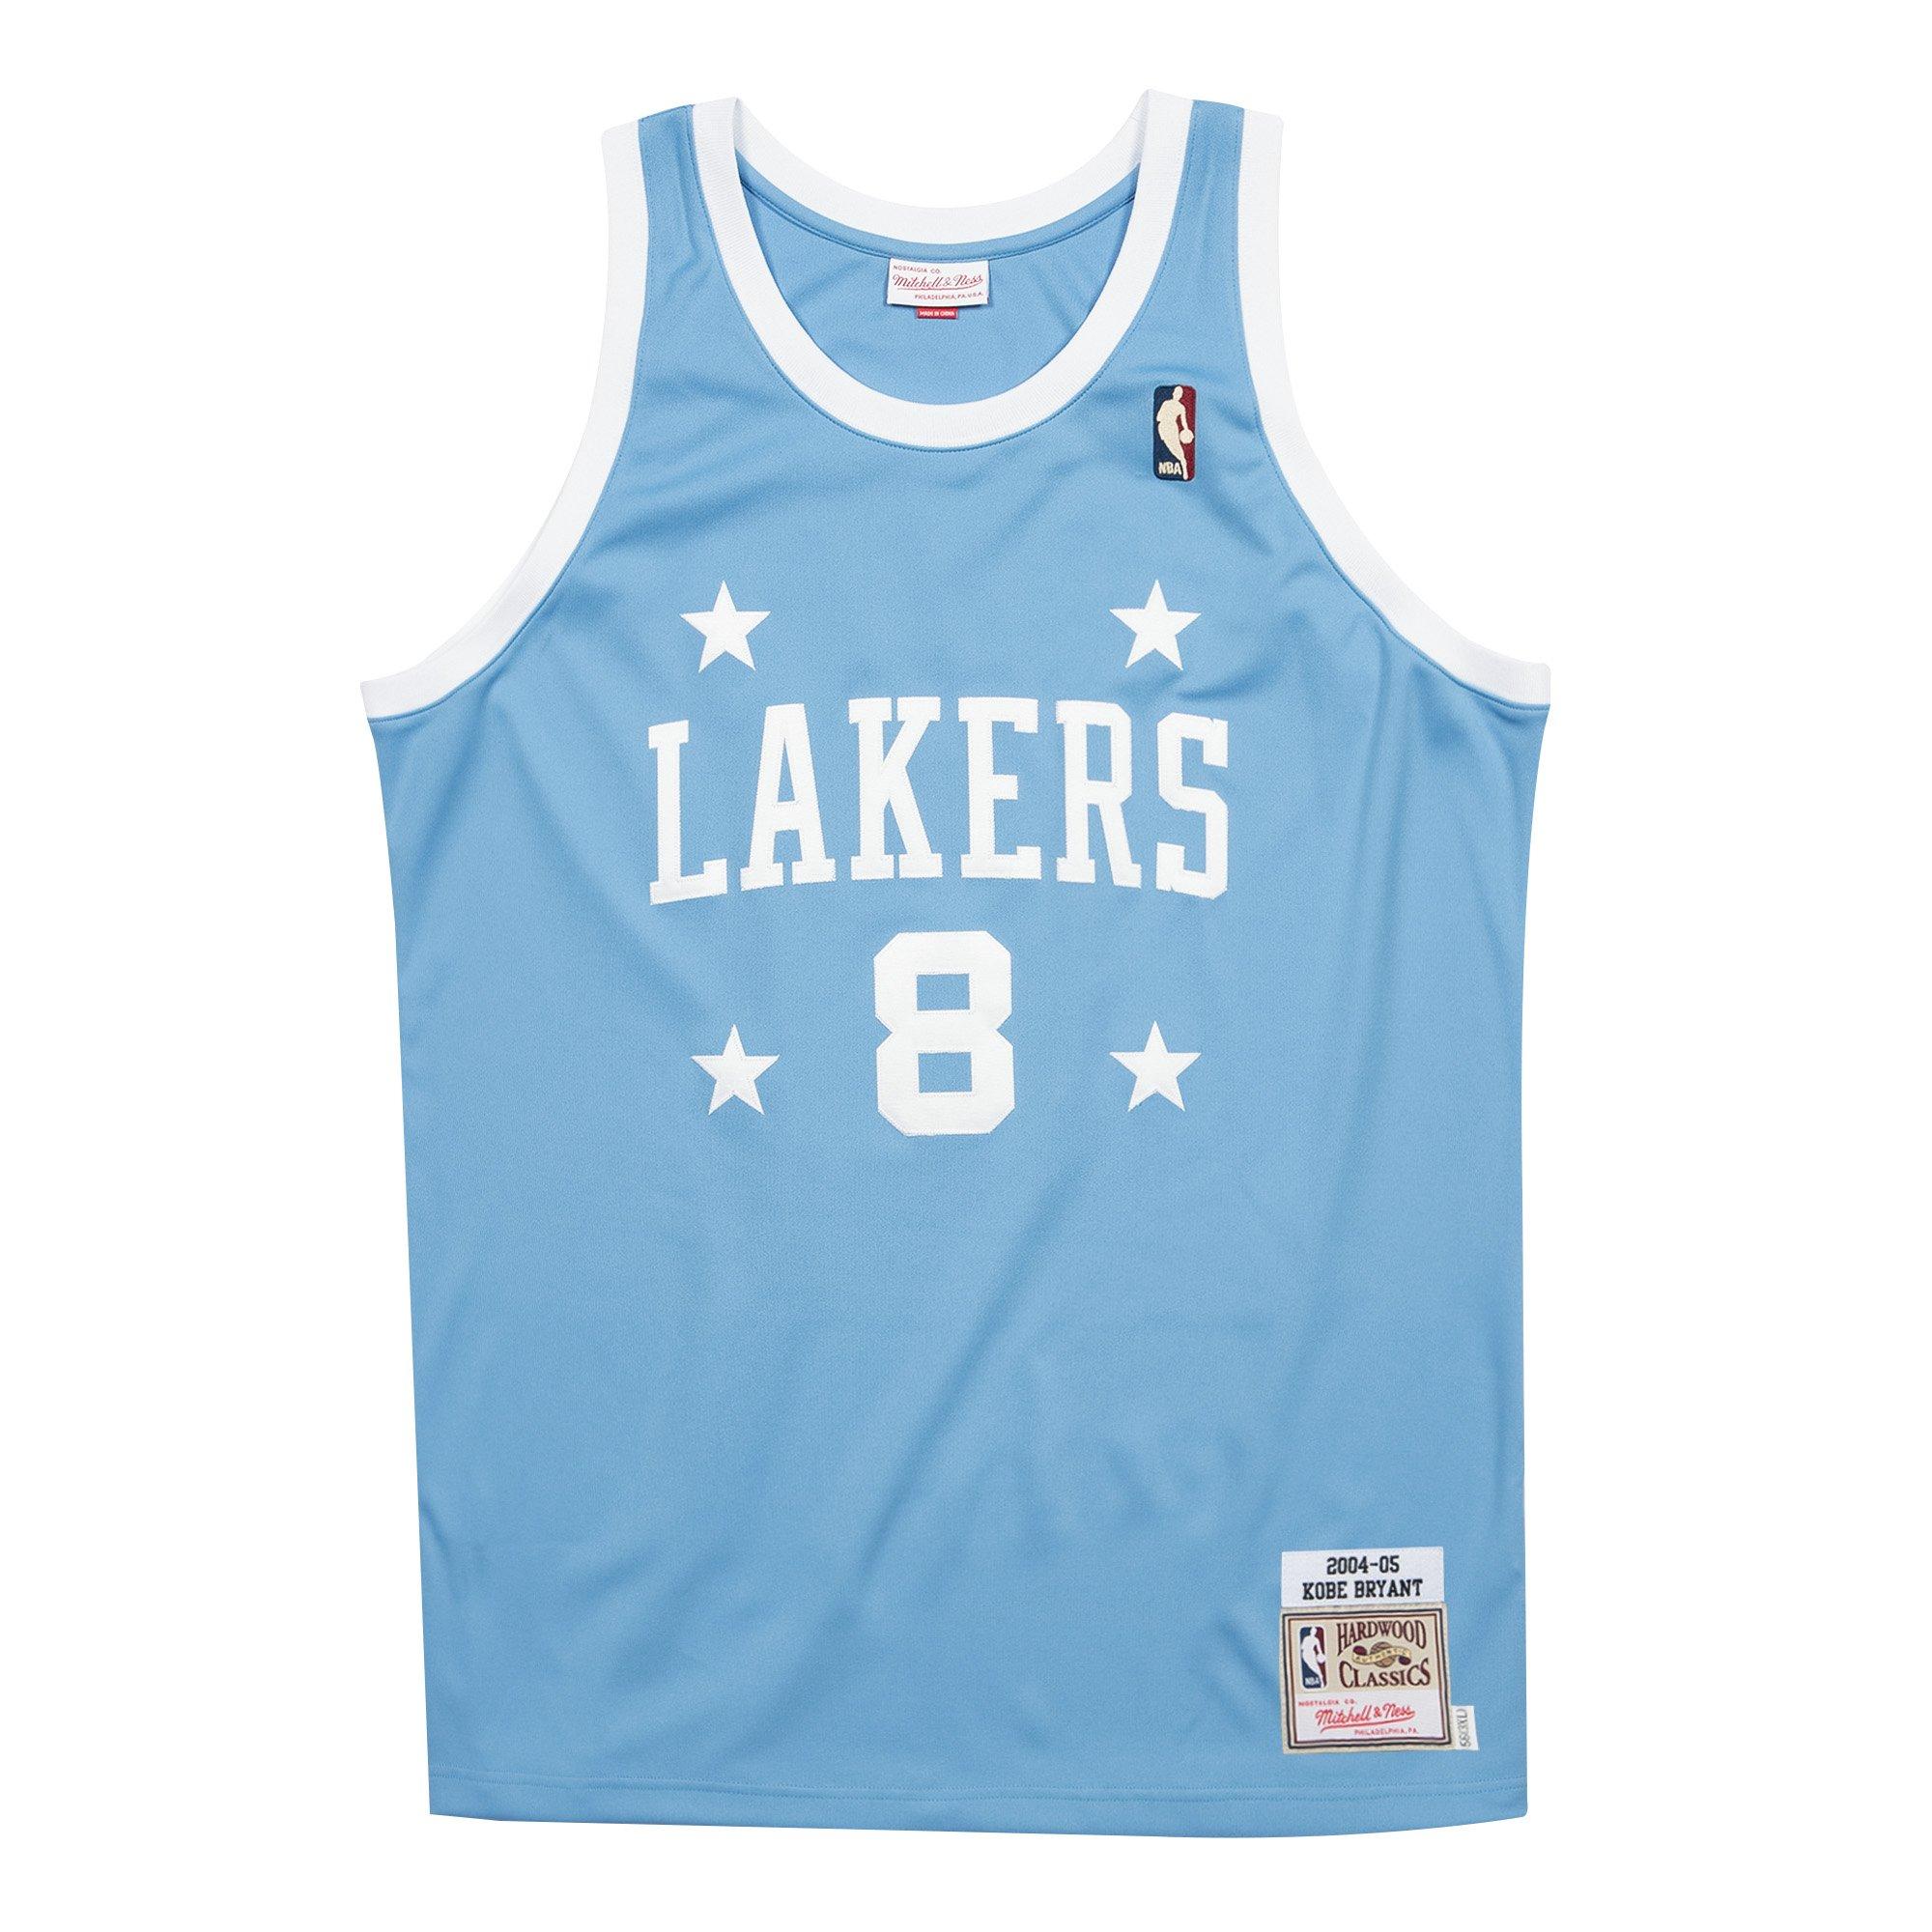 lakers baby jersey